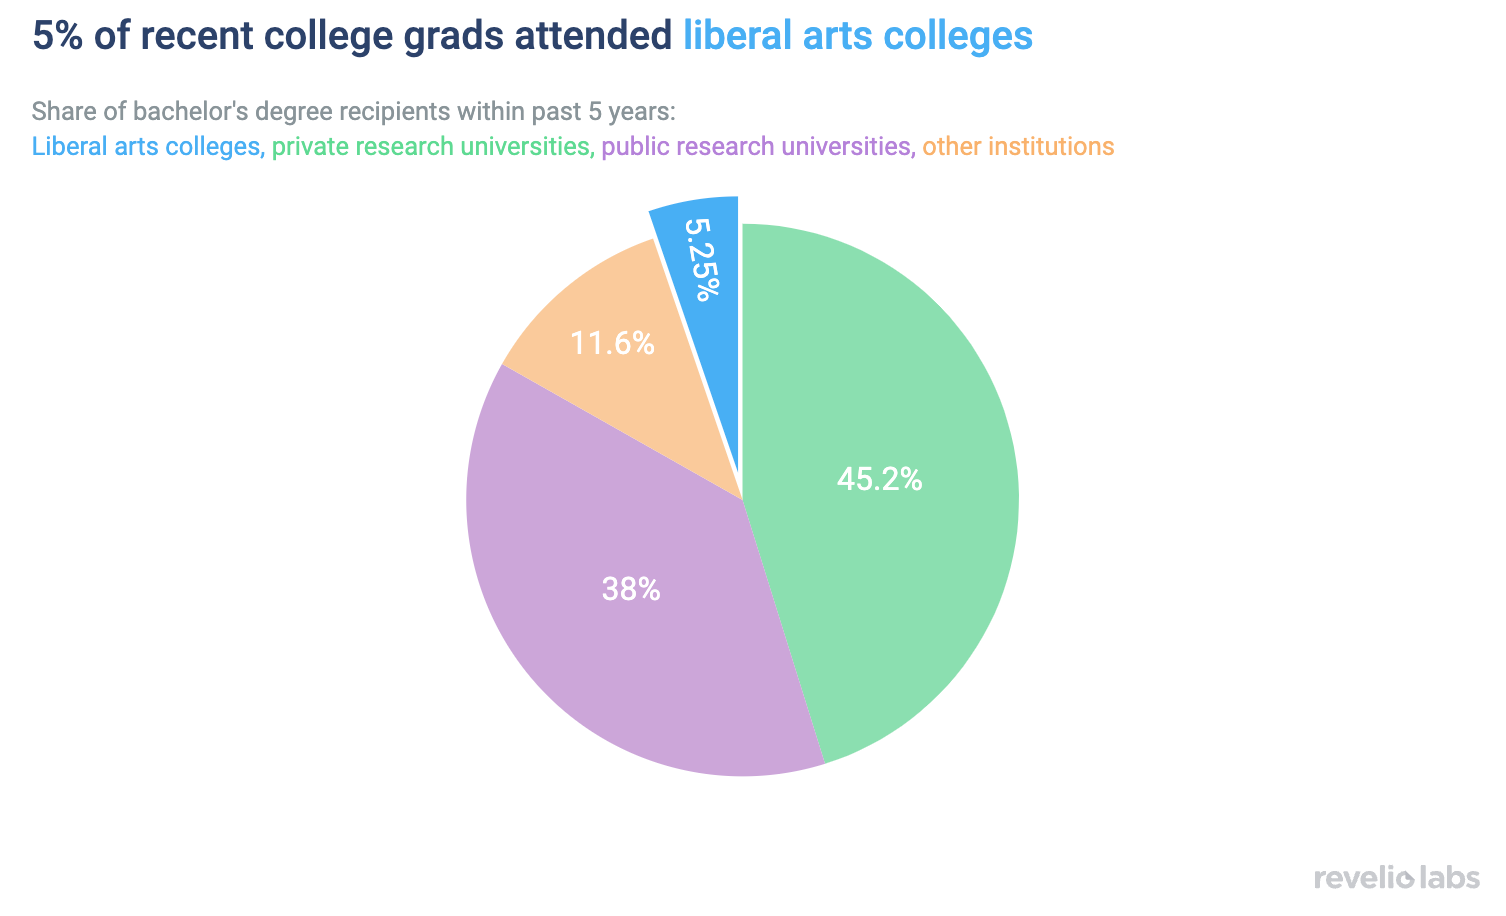 5% of recent college grads attended liberal arts colleges